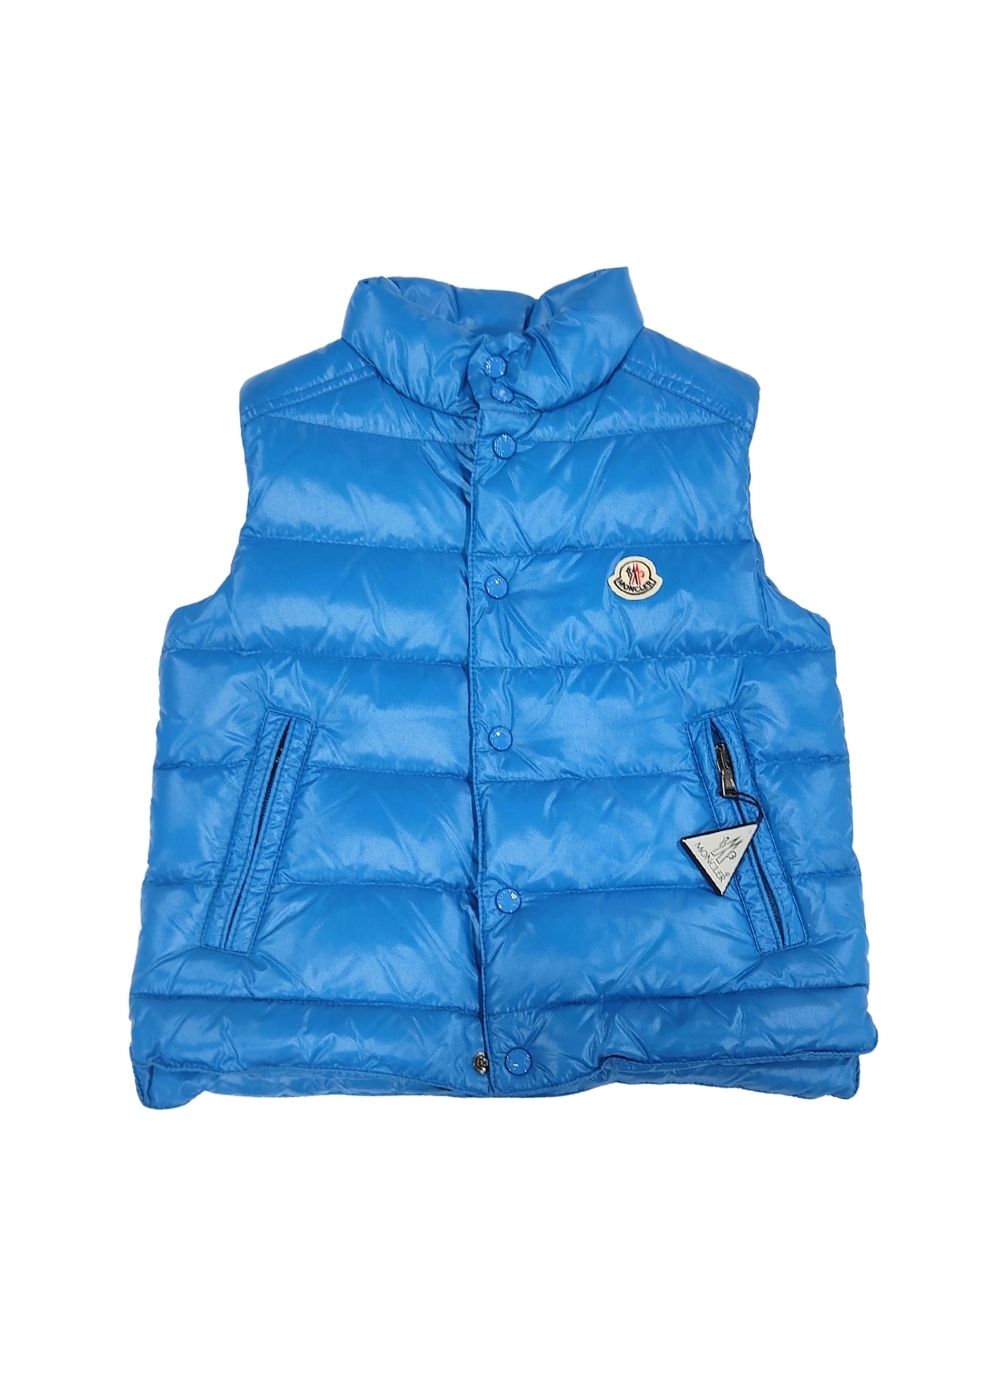 Featured image for “MONCLER GILET LUCIDO”